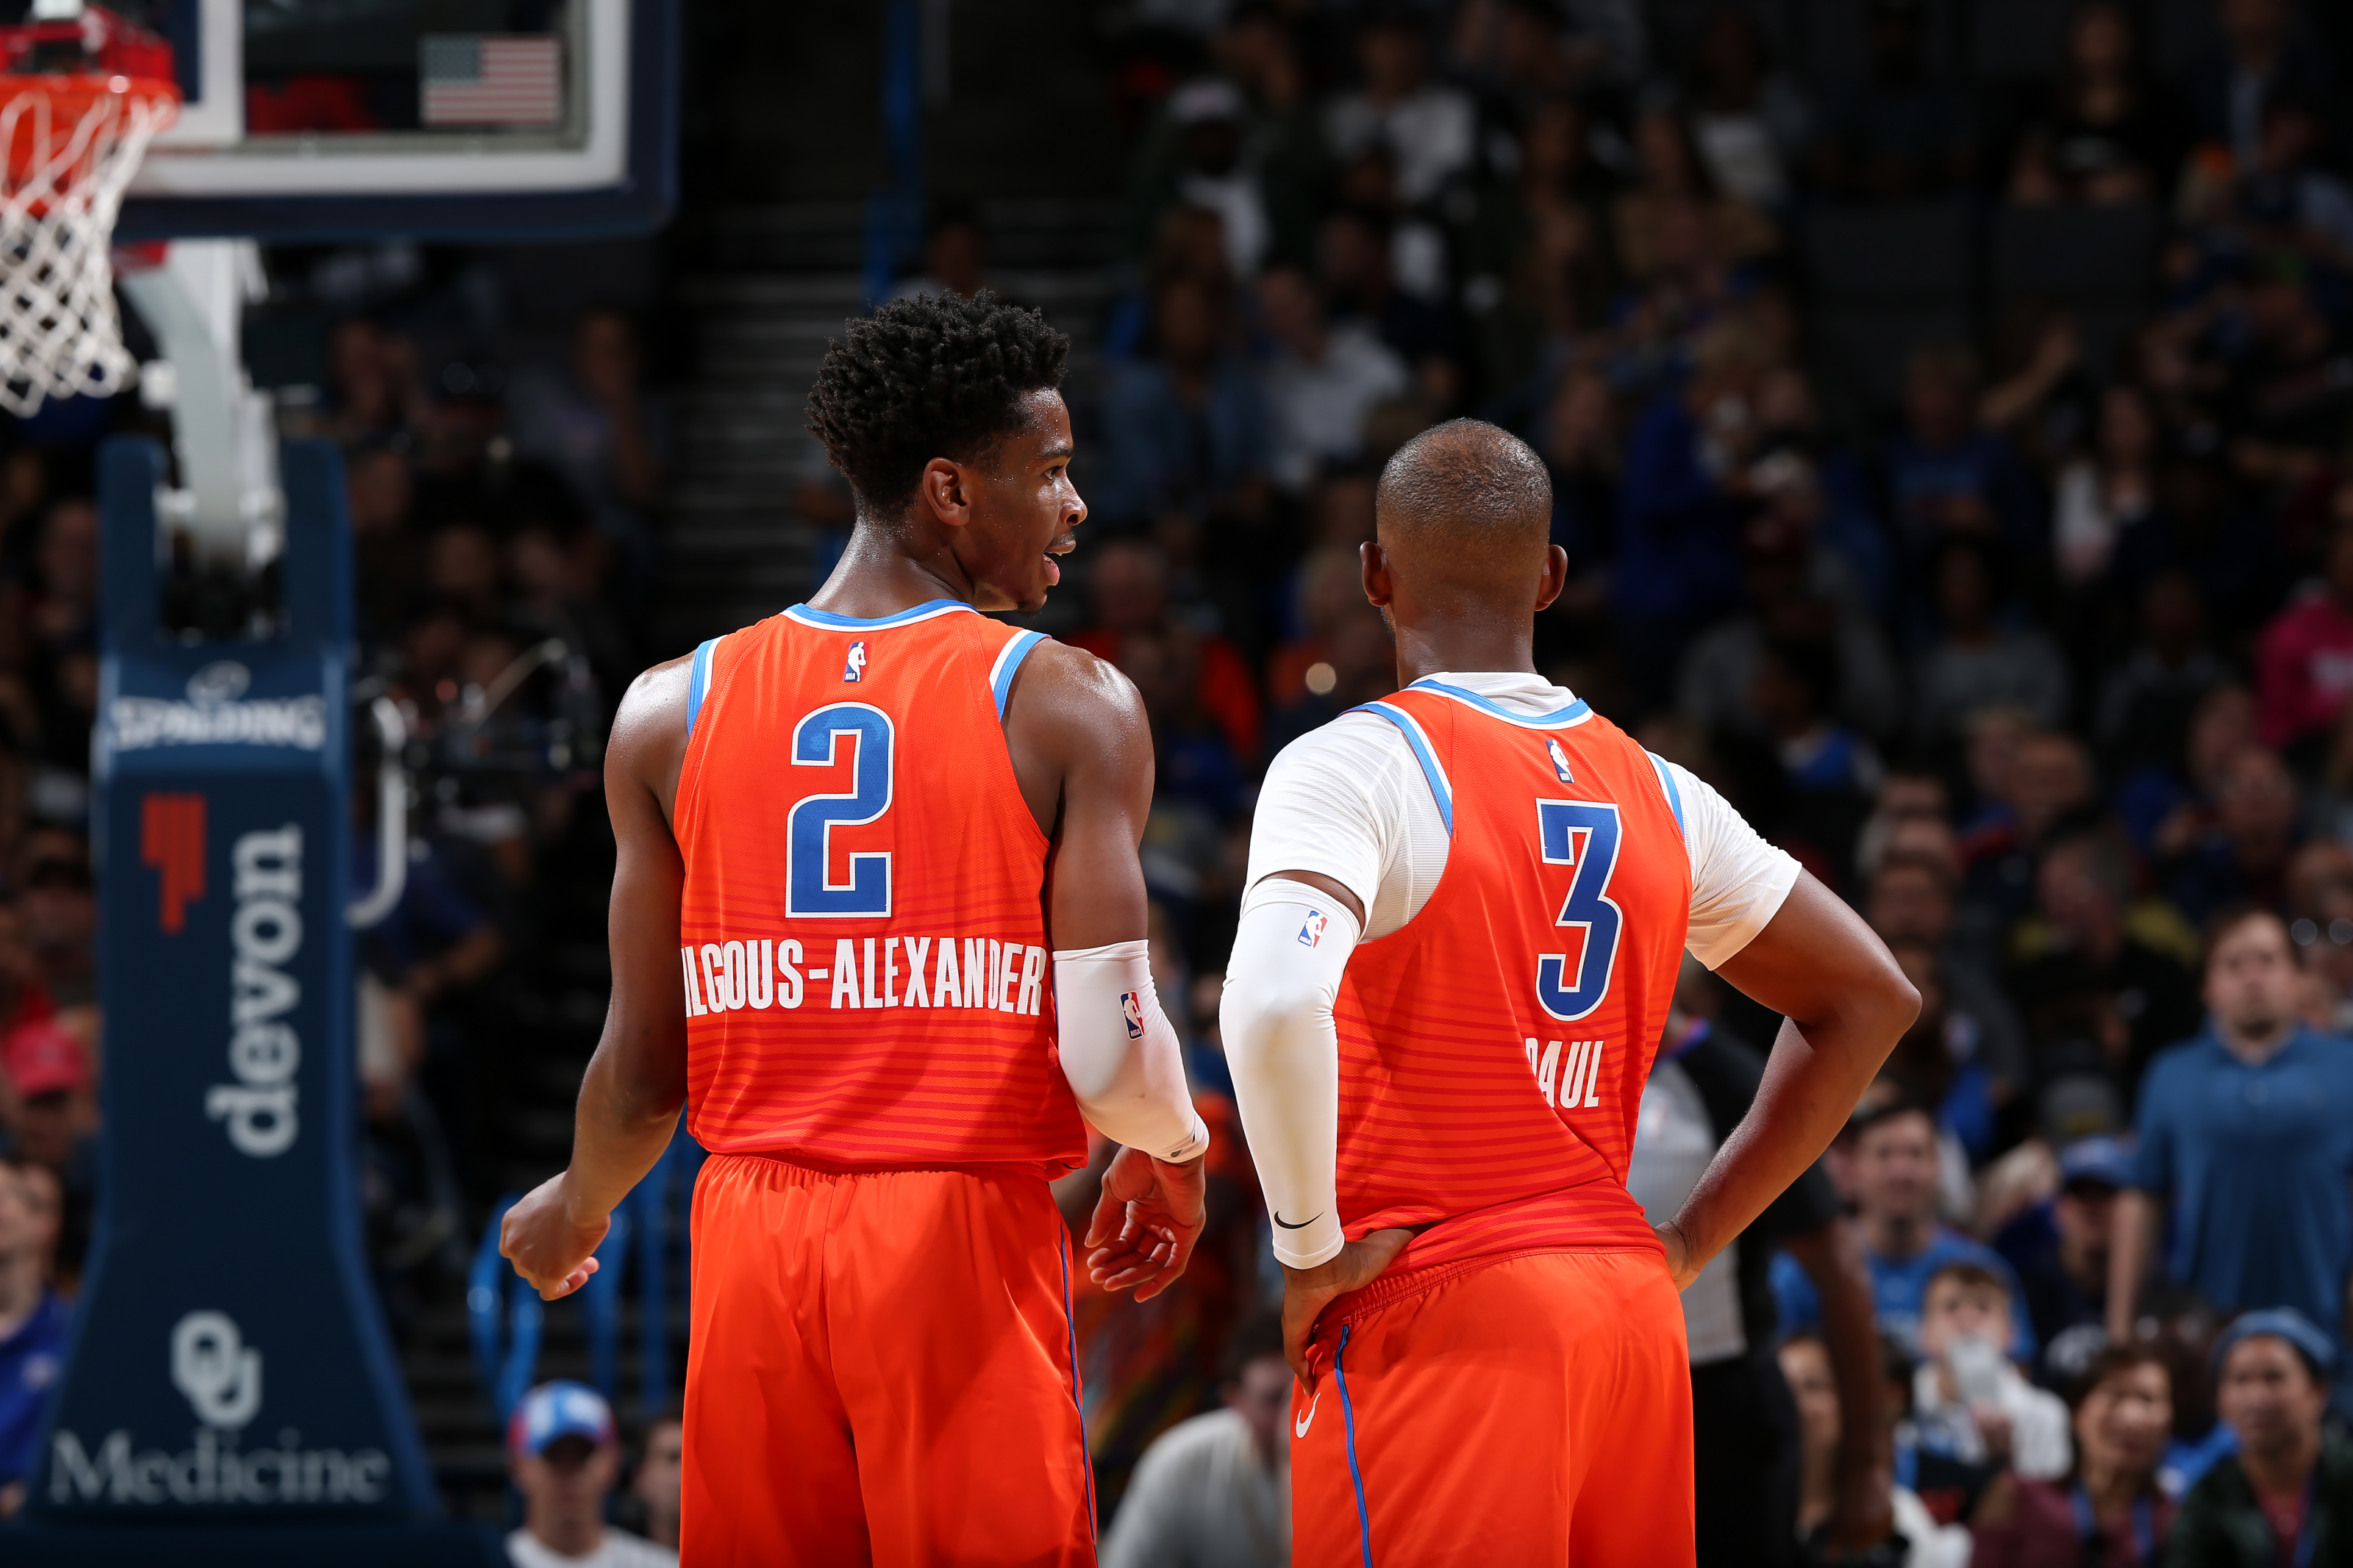 Shai Gilgeous-Alexander, 3 stars primed for first NBA All-Star Game